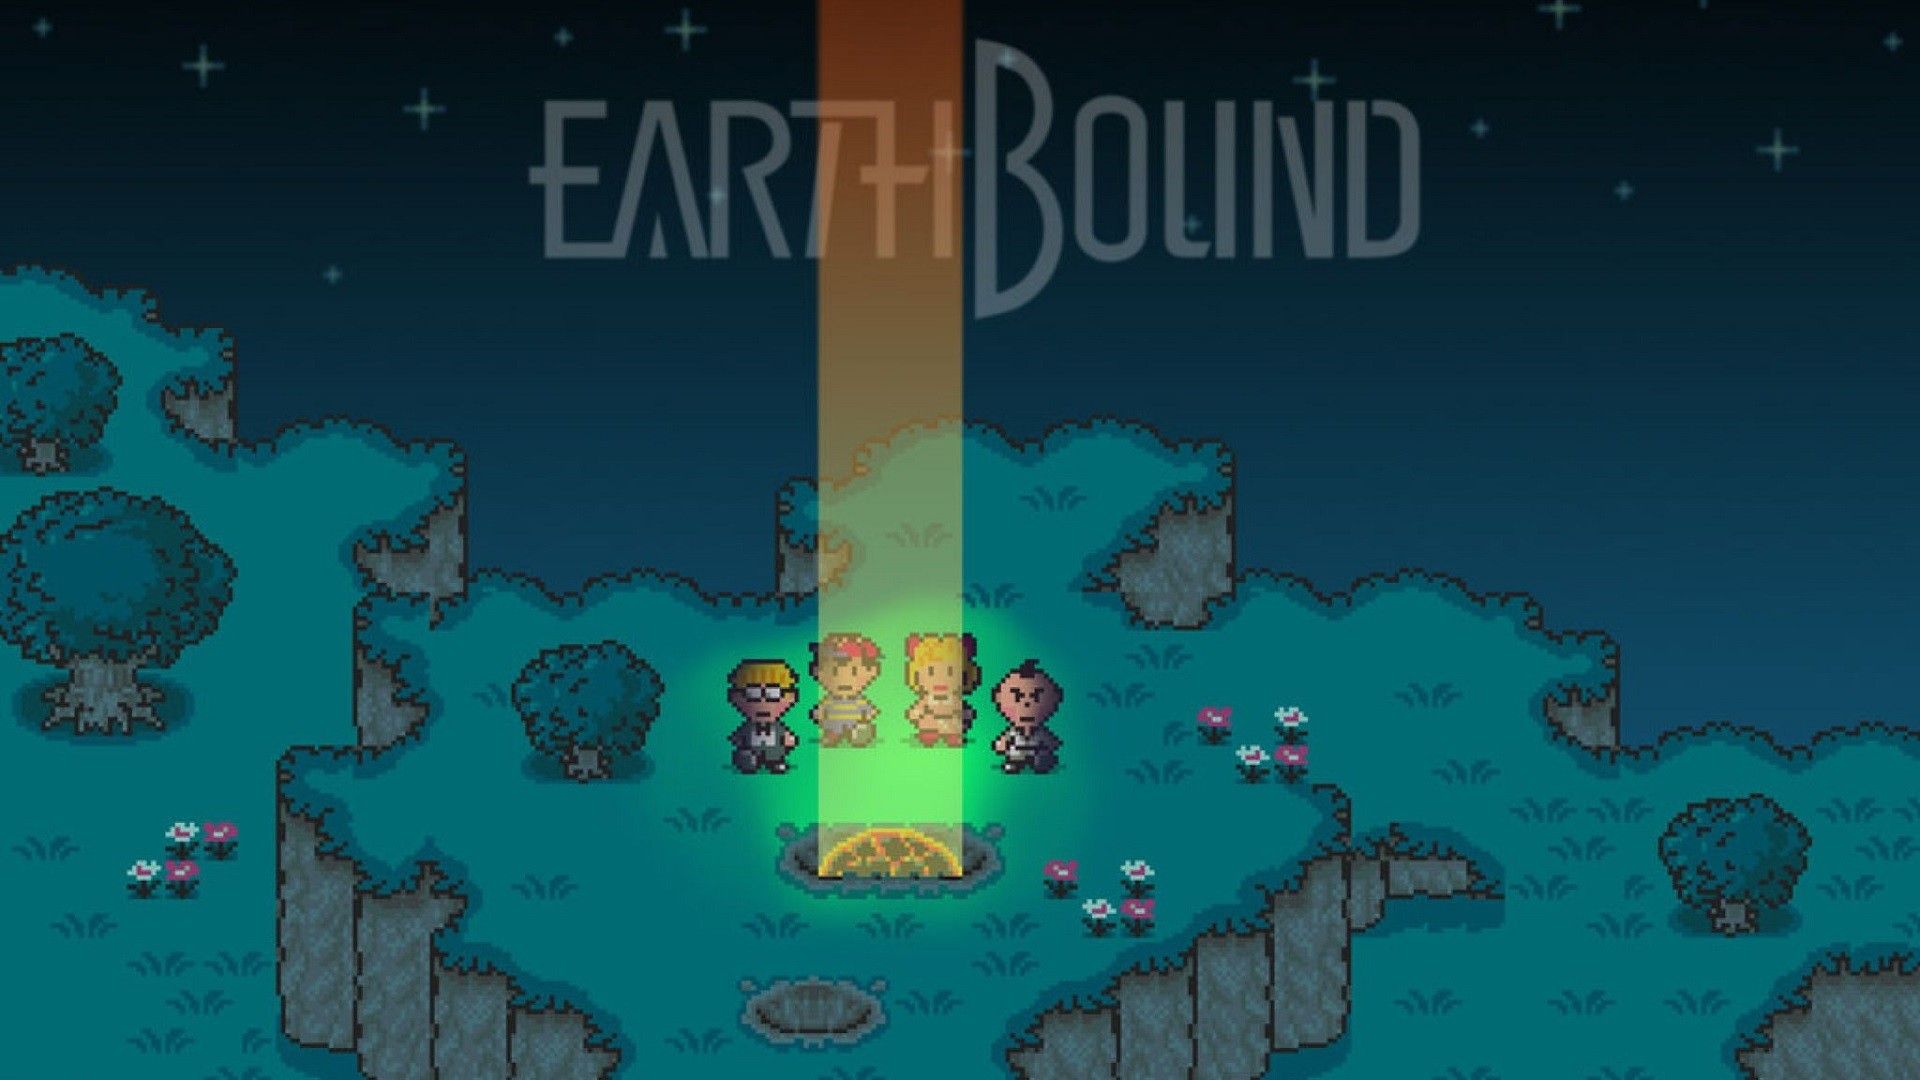 Earthbound Iphone Wallpapers